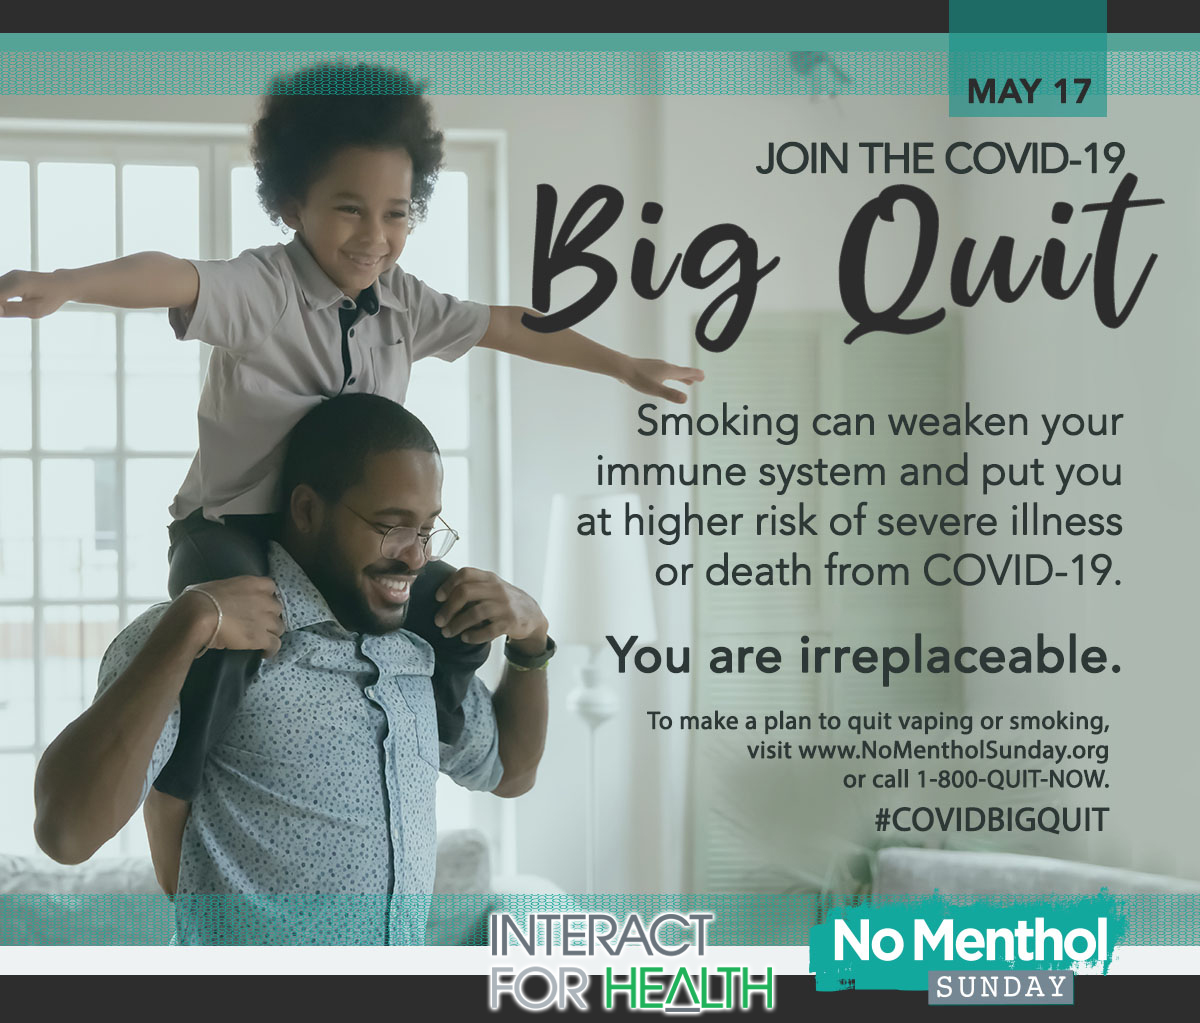 Sunday May 17, 2020 is No Menthol Sunday presented by Interact For Health